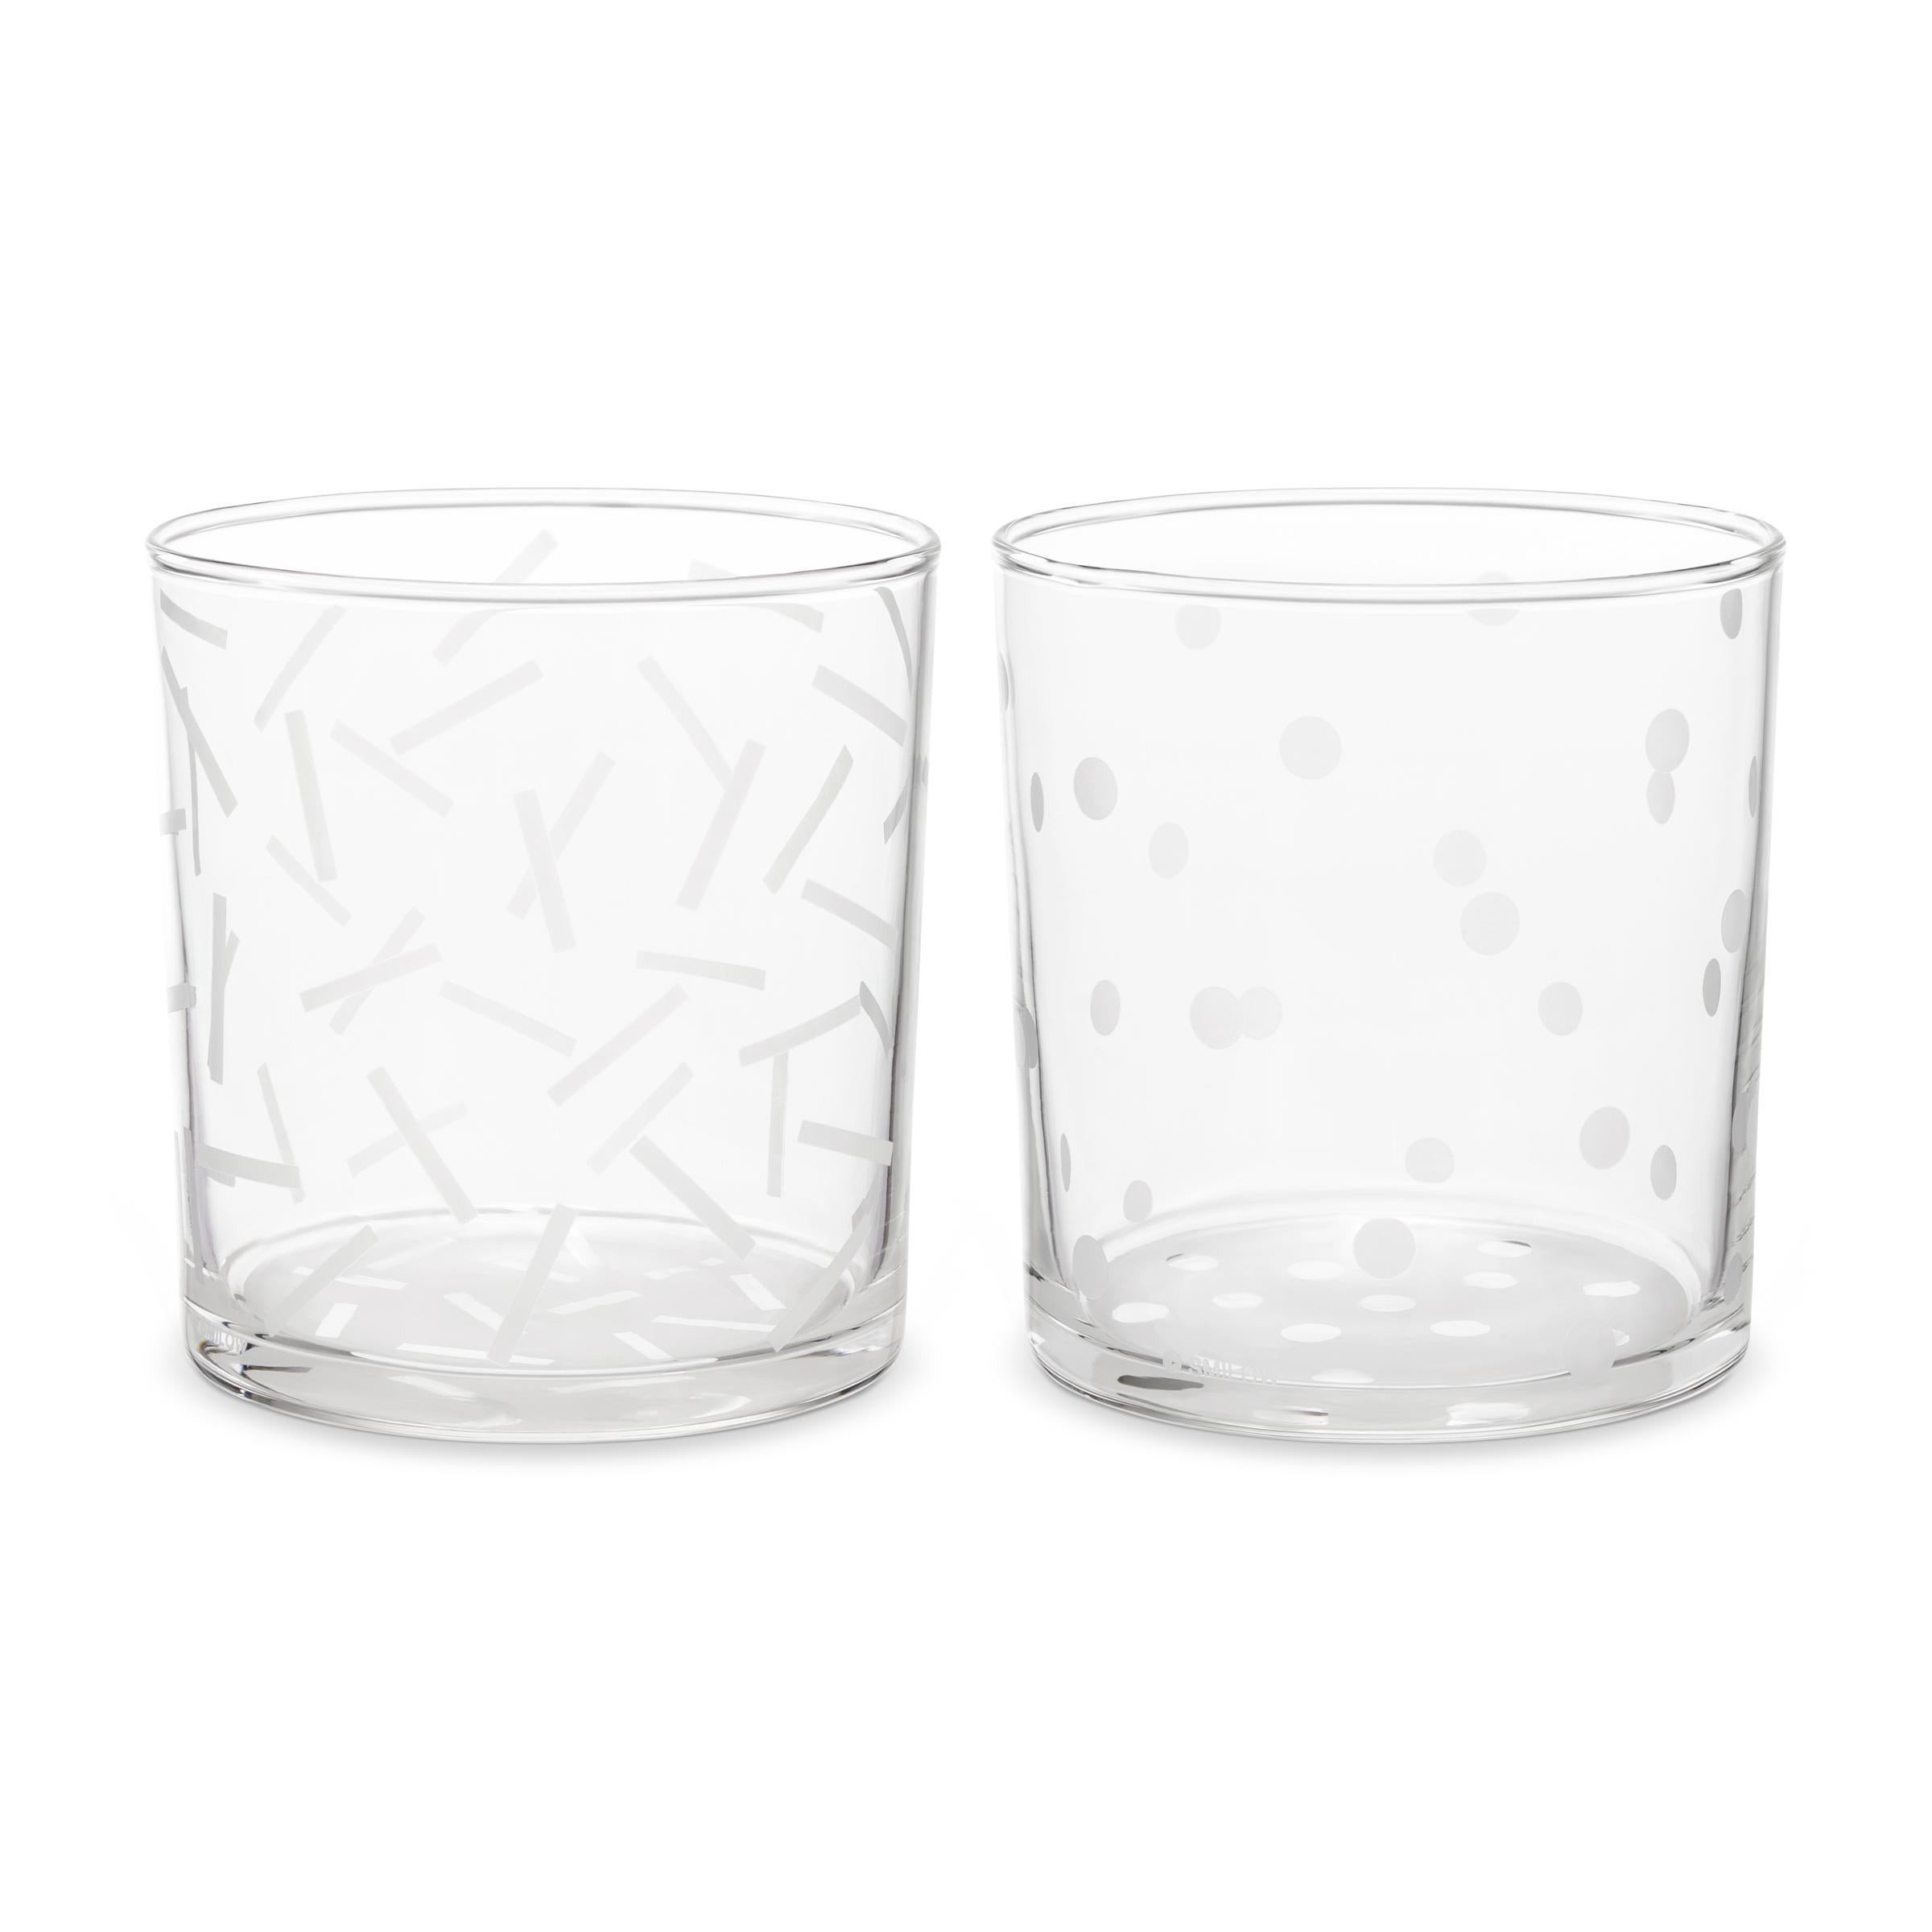 Dots and dashes glasses, set of 6. 3 dots, 3 dashes. 

The dots and dashes glasses are modern, simple, and elegant, durable enough to last a lifetime. These glasses were first shown in Lloyd Herman’s 1990 exhibit and publication “Art that Works,